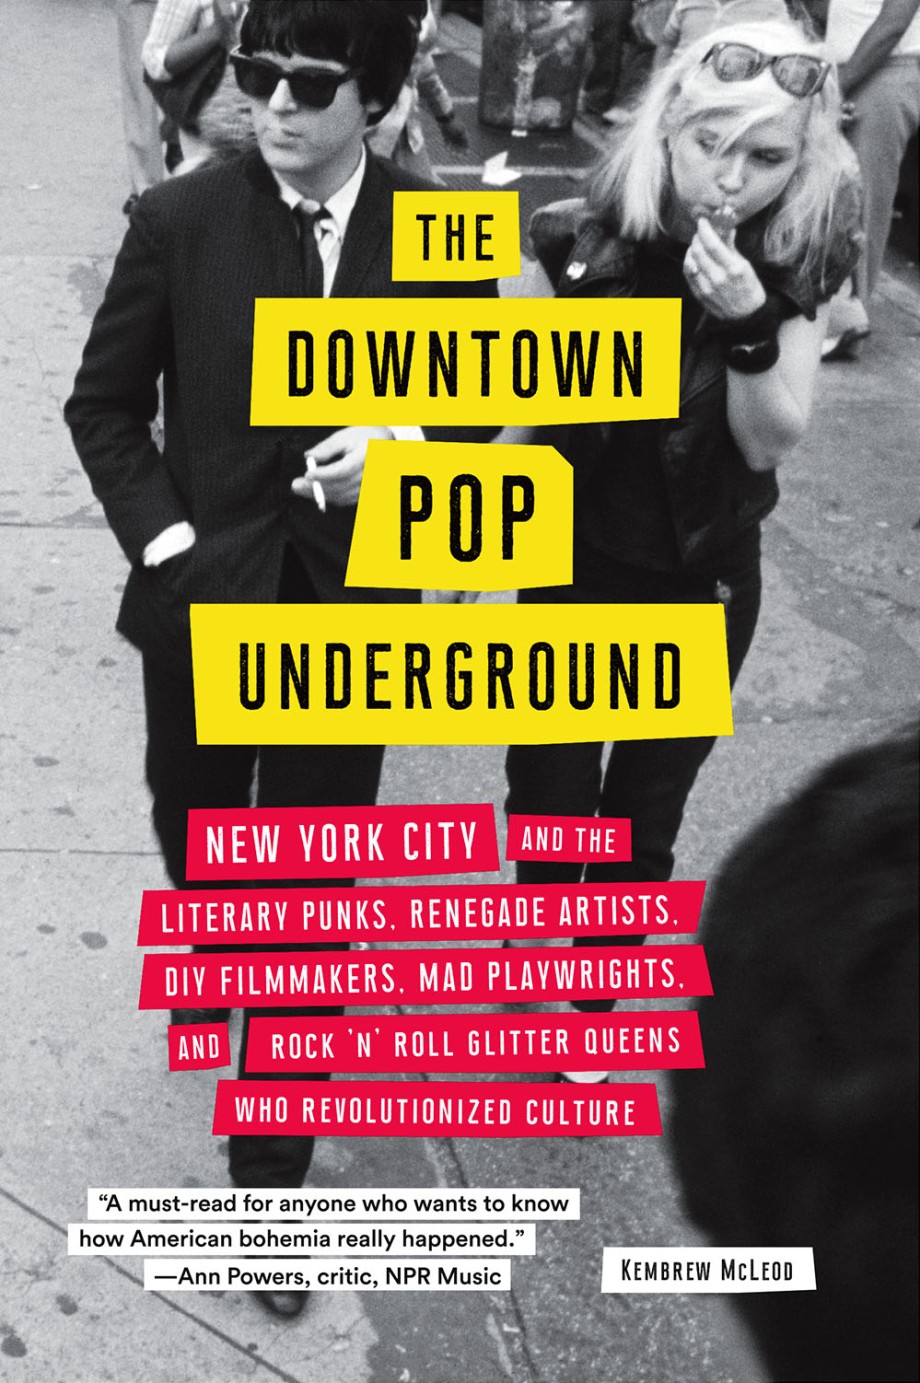 Downtown Pop Underground New York City and the literary punks, renegade artists, DIY filmmakers, mad playwrights, and rock 'n' roll glitter queens who revolutionized culture